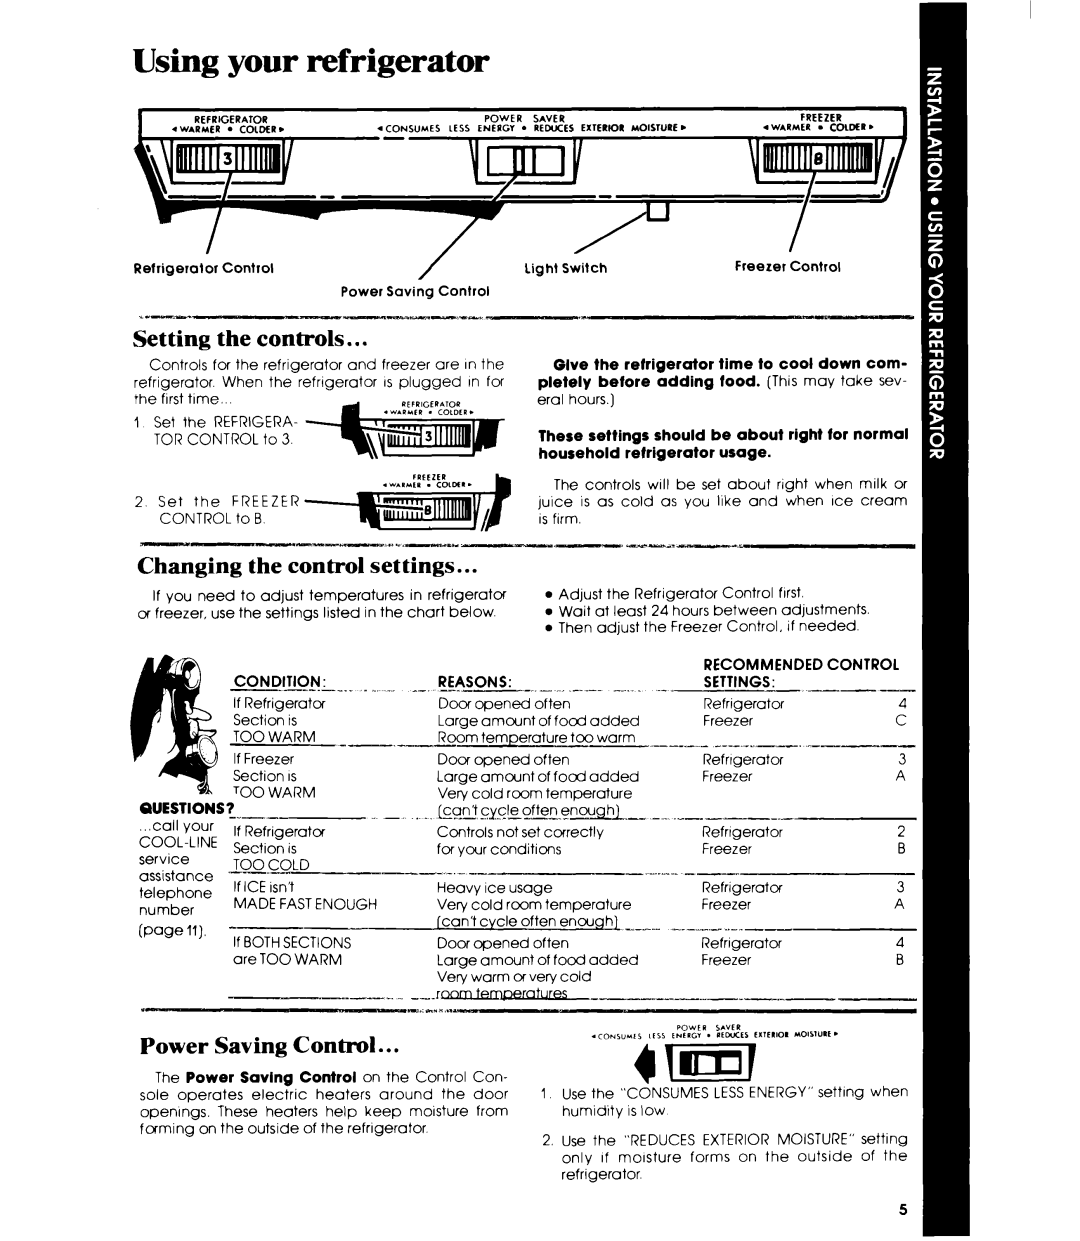 Whirlpool ET16AK manual Using your refrigerator, Setting, the controls, Changing the control settings, Power Saving Control 